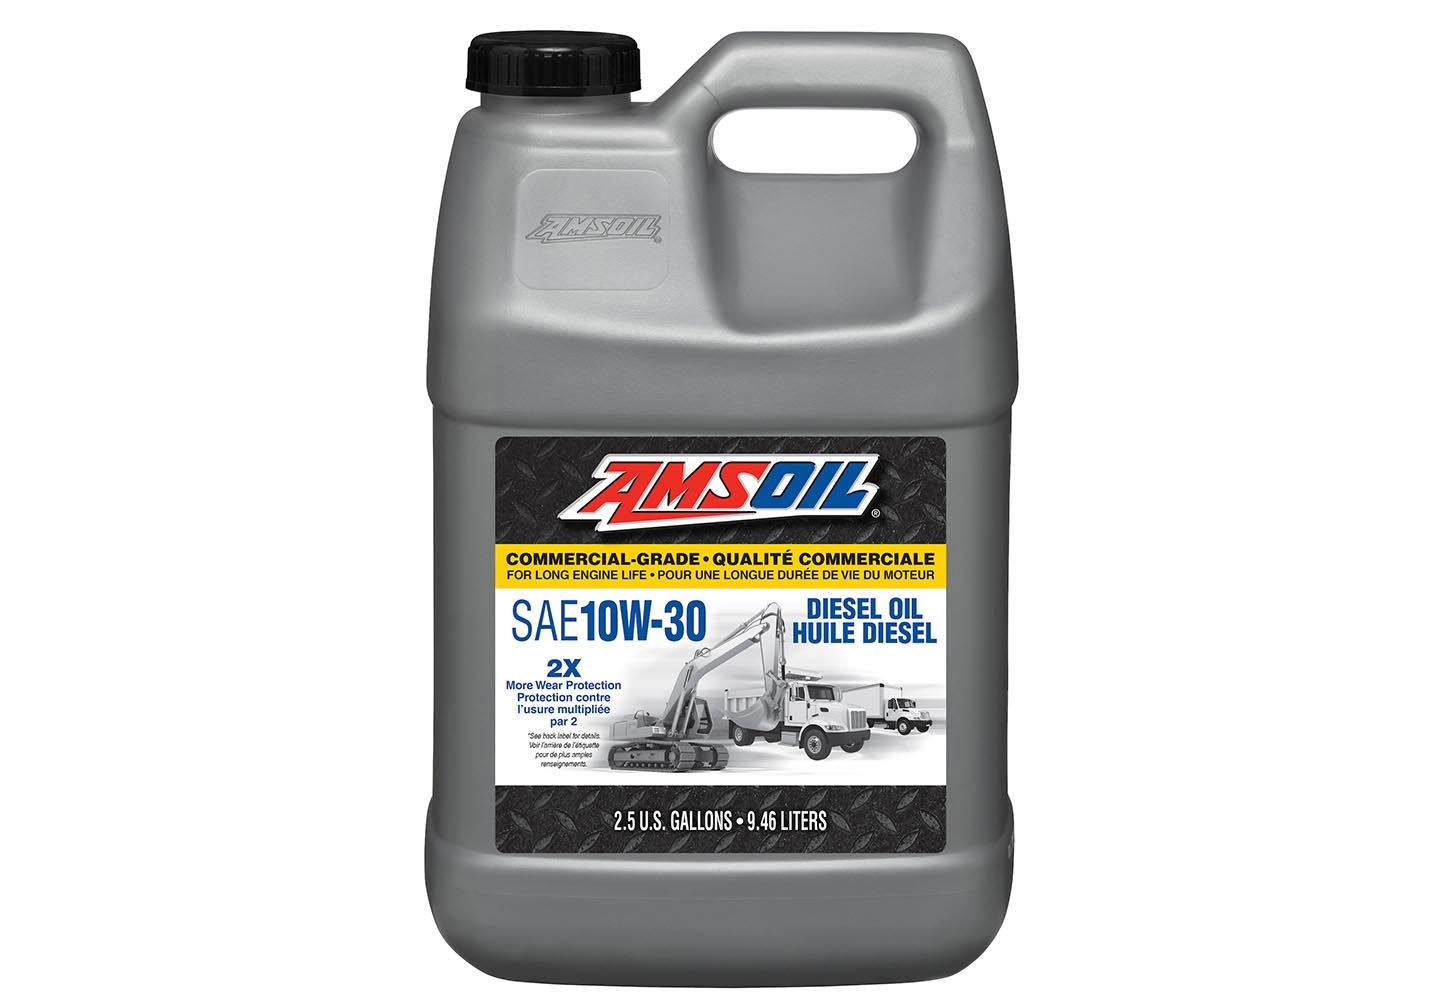 AMSOIL introduces 10W-30 diesel motor oil for heavy-duty use